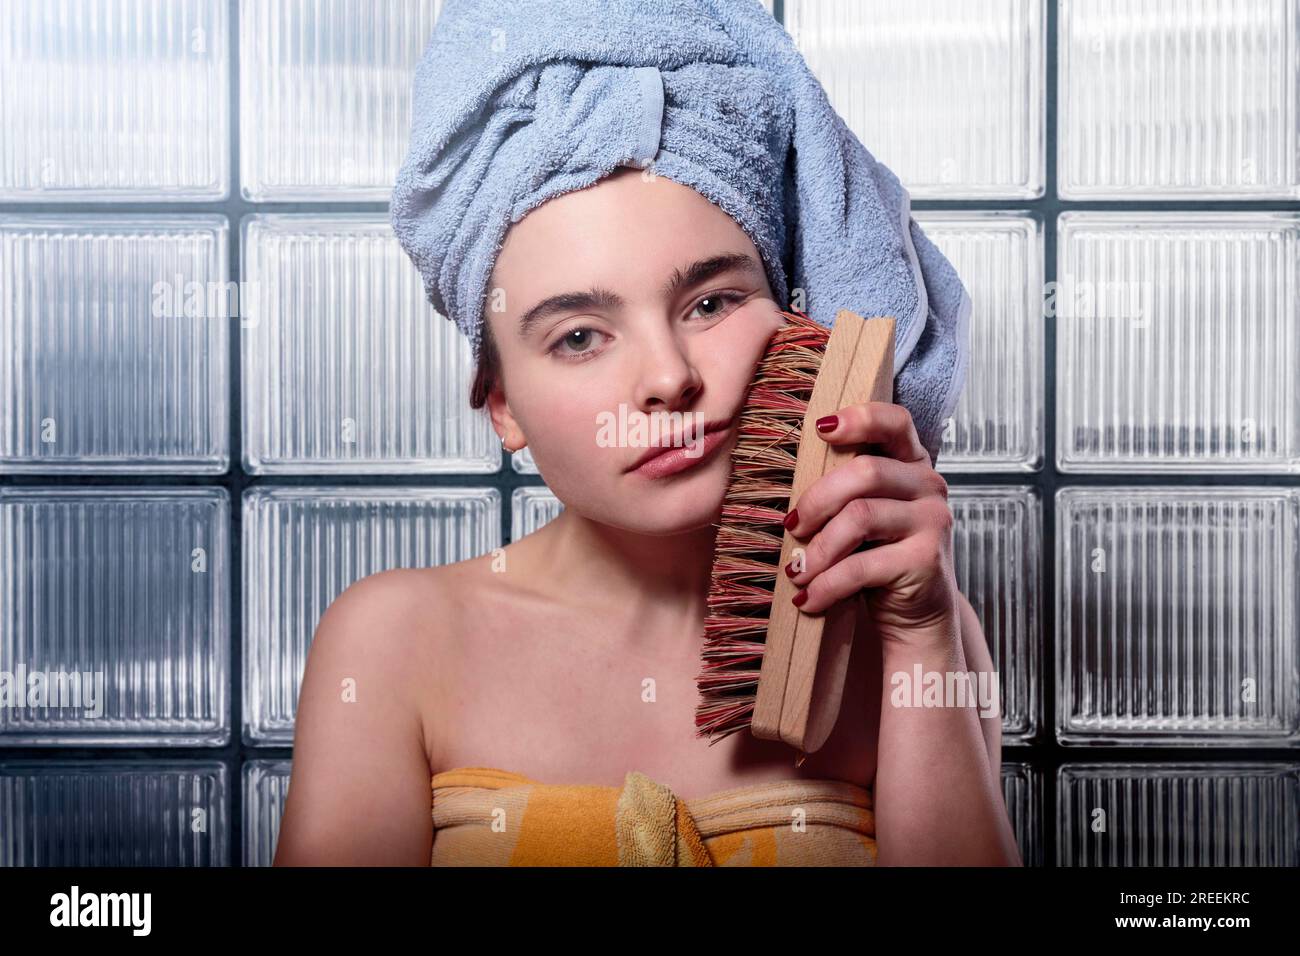 Sad woman cleaning her face with a huge scrubbing brush Stock Photo